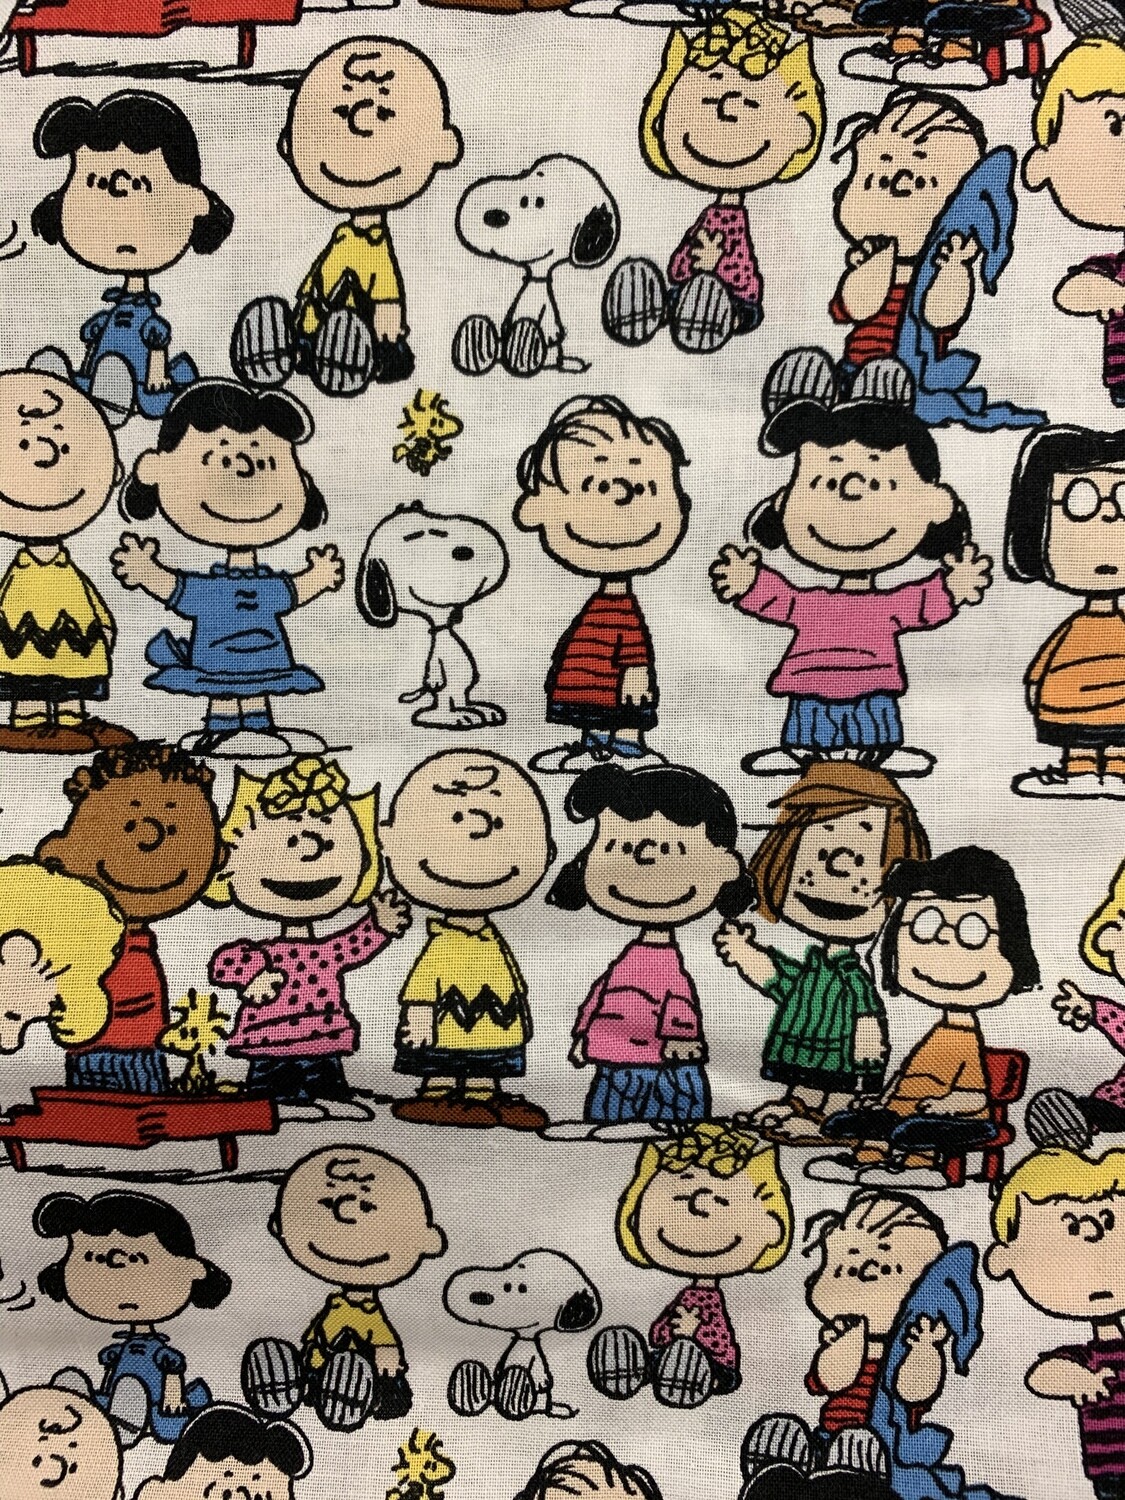 Charlie Brown & Friends Cotton Fabric Face Mask